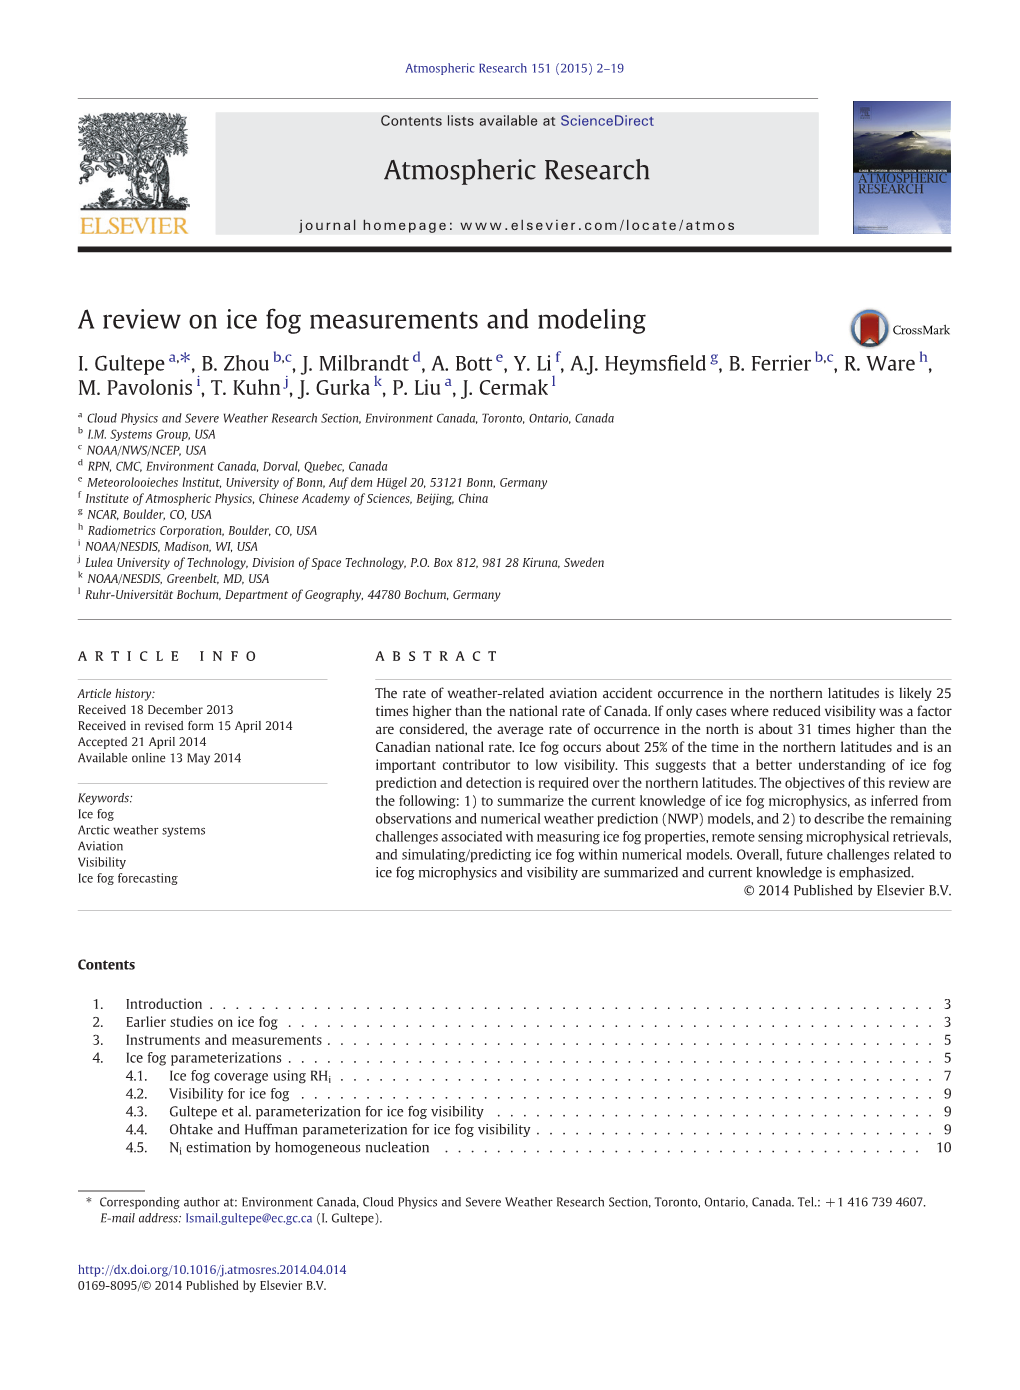 A Review on Ice Fog Measurements and Monitoring